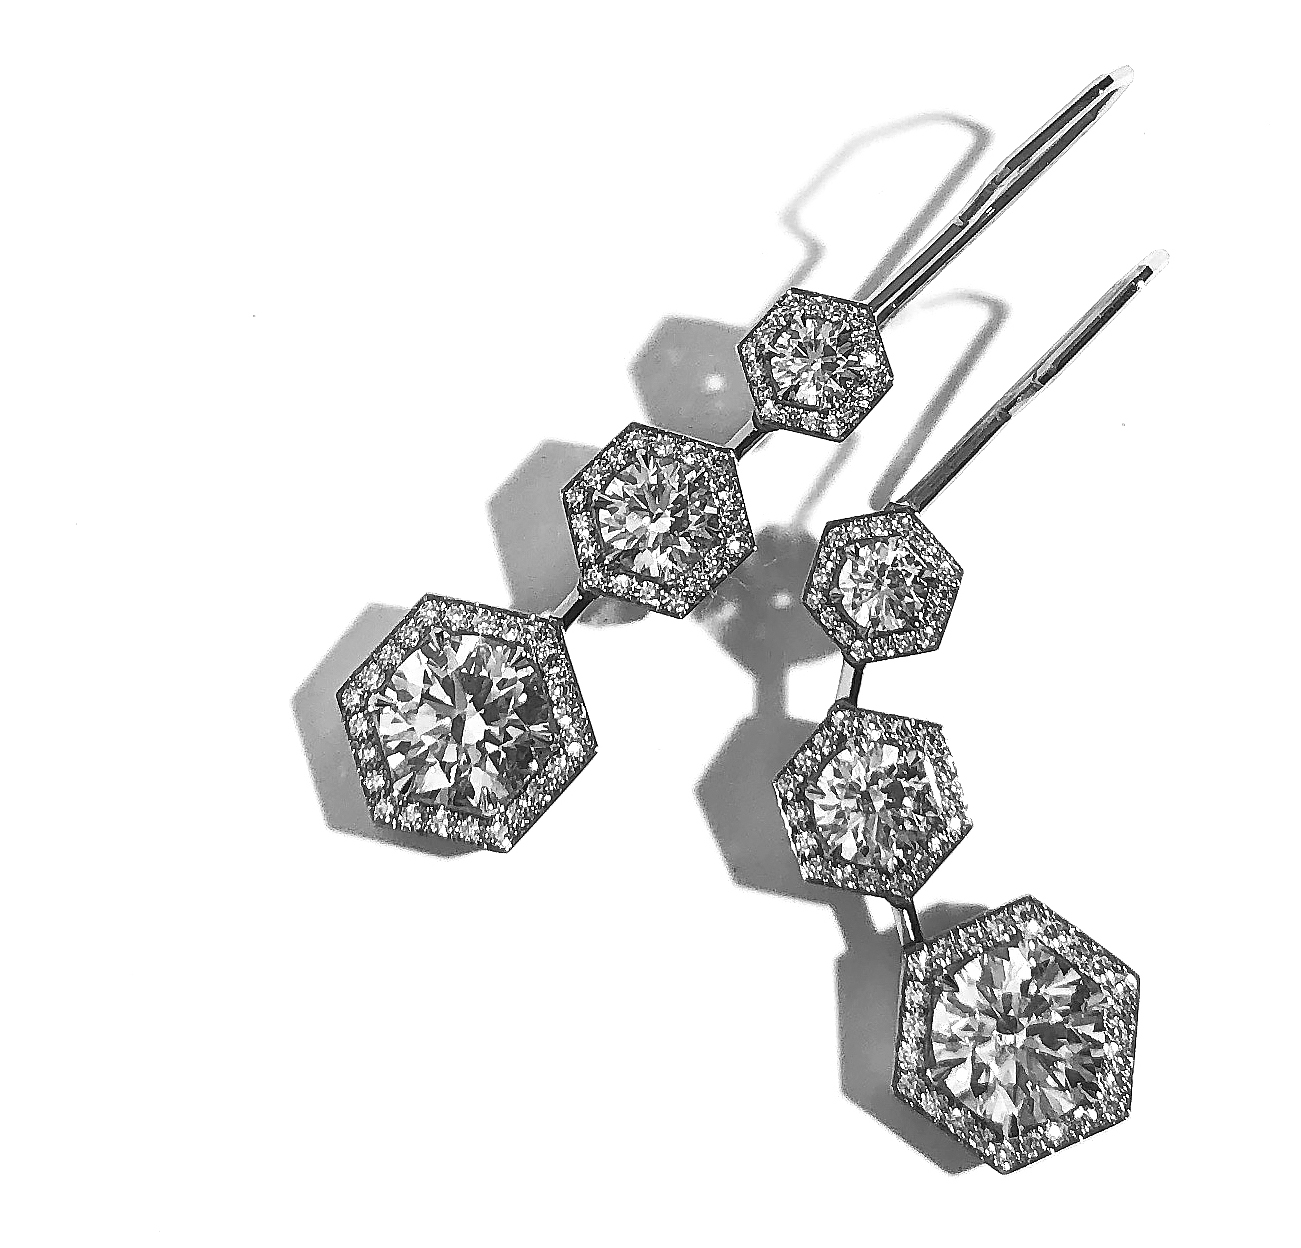 Hex Diamond Pendant Earrings by Geoffrey Good - 18K white gold with diamond pave surrounding. The six center stones are 6+ tcw.